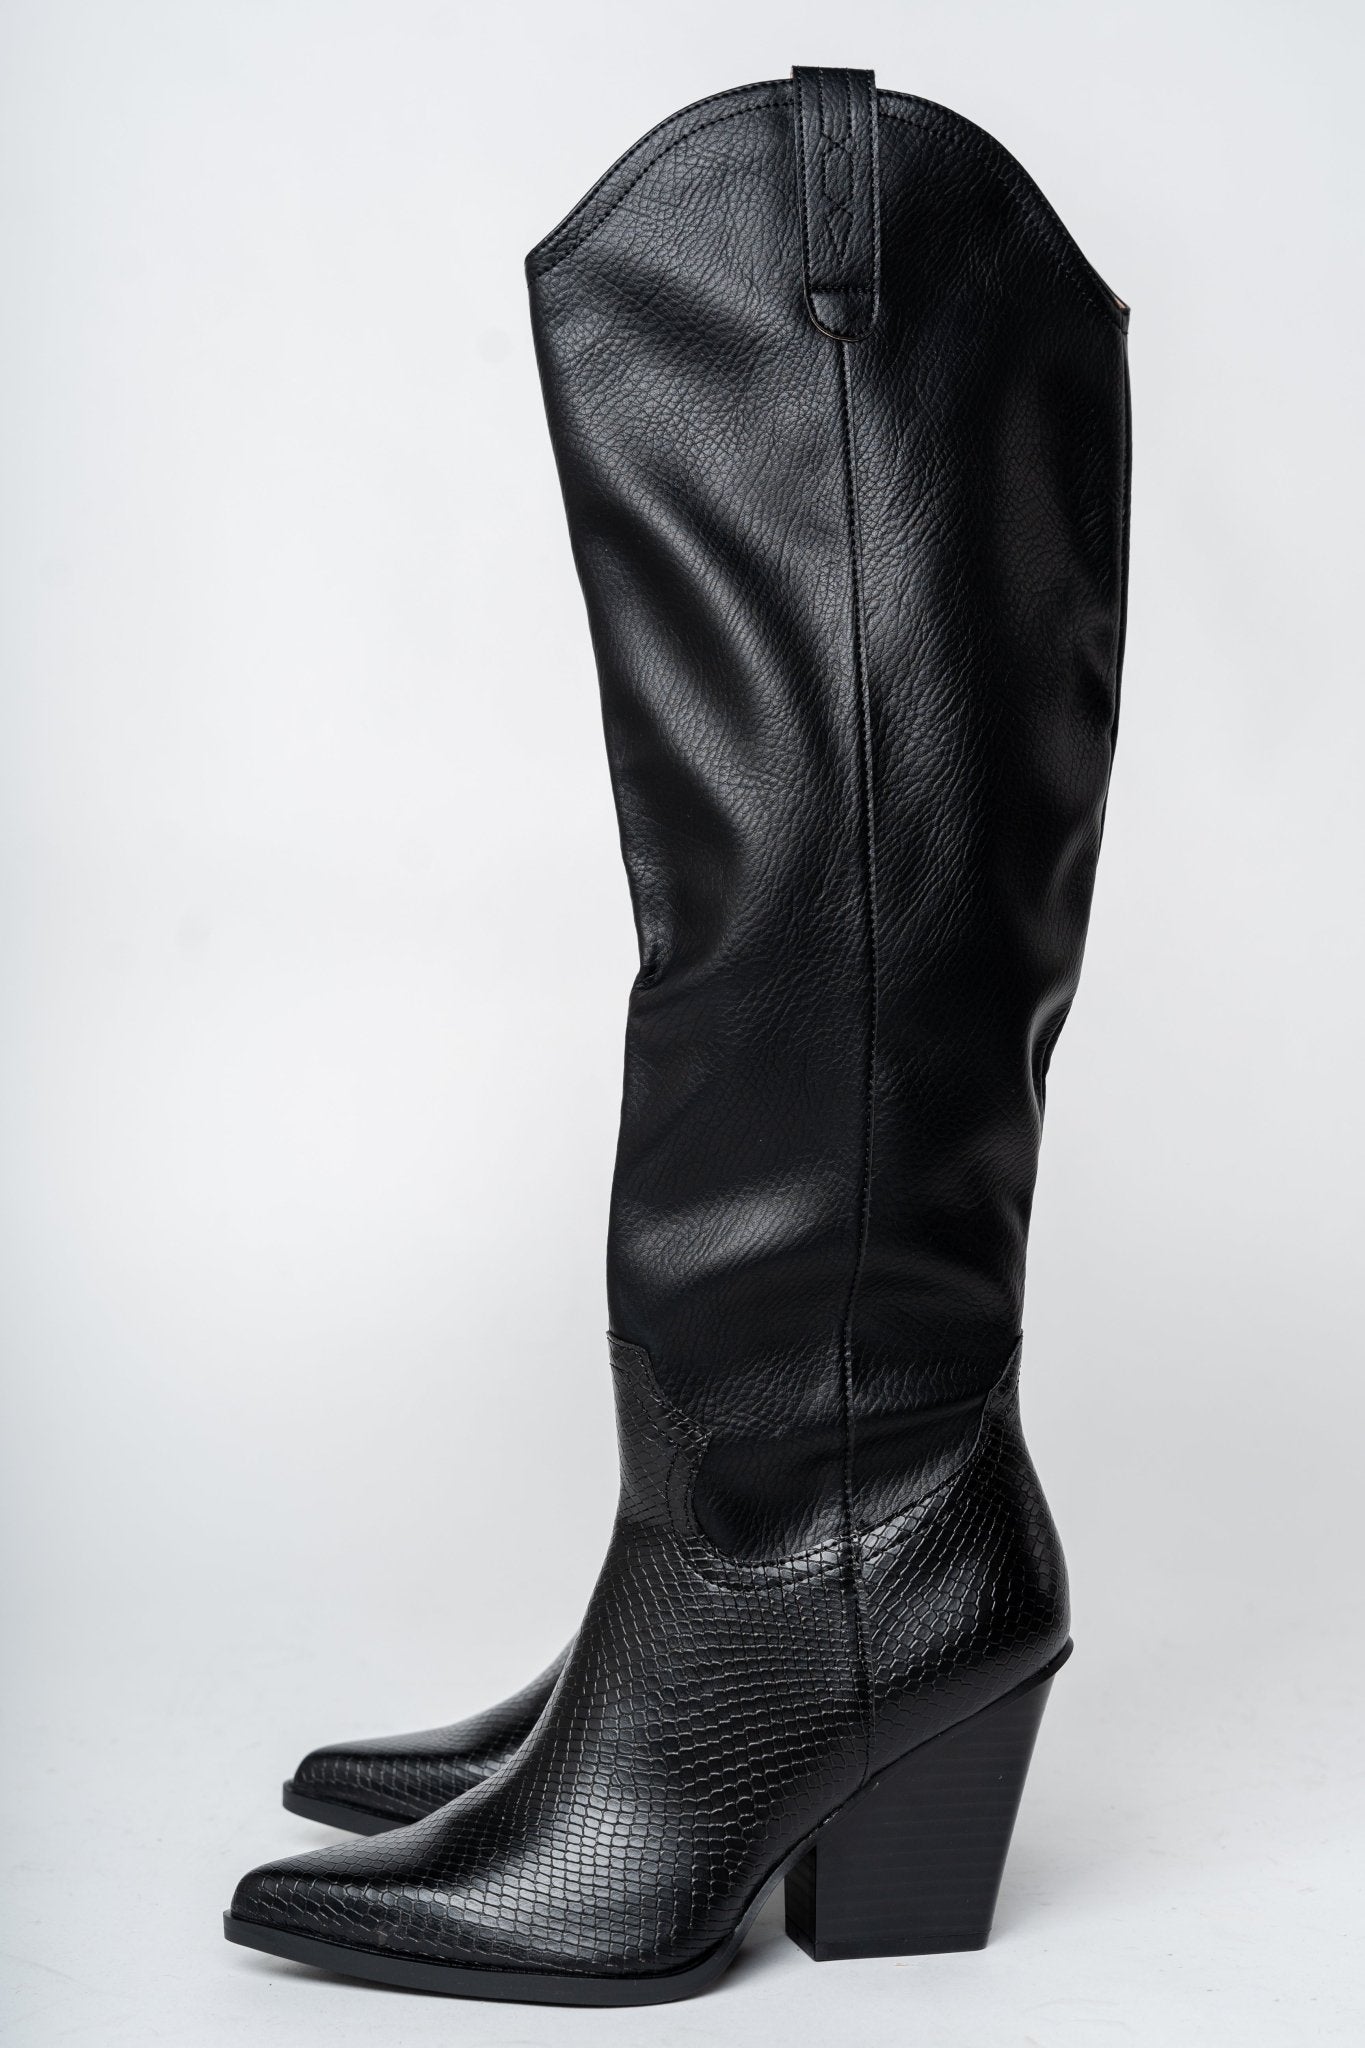 Barcelona western boot black - Affordable shoes - Boutique Shoes at Lush Fashion Lounge Boutique in Oklahoma City